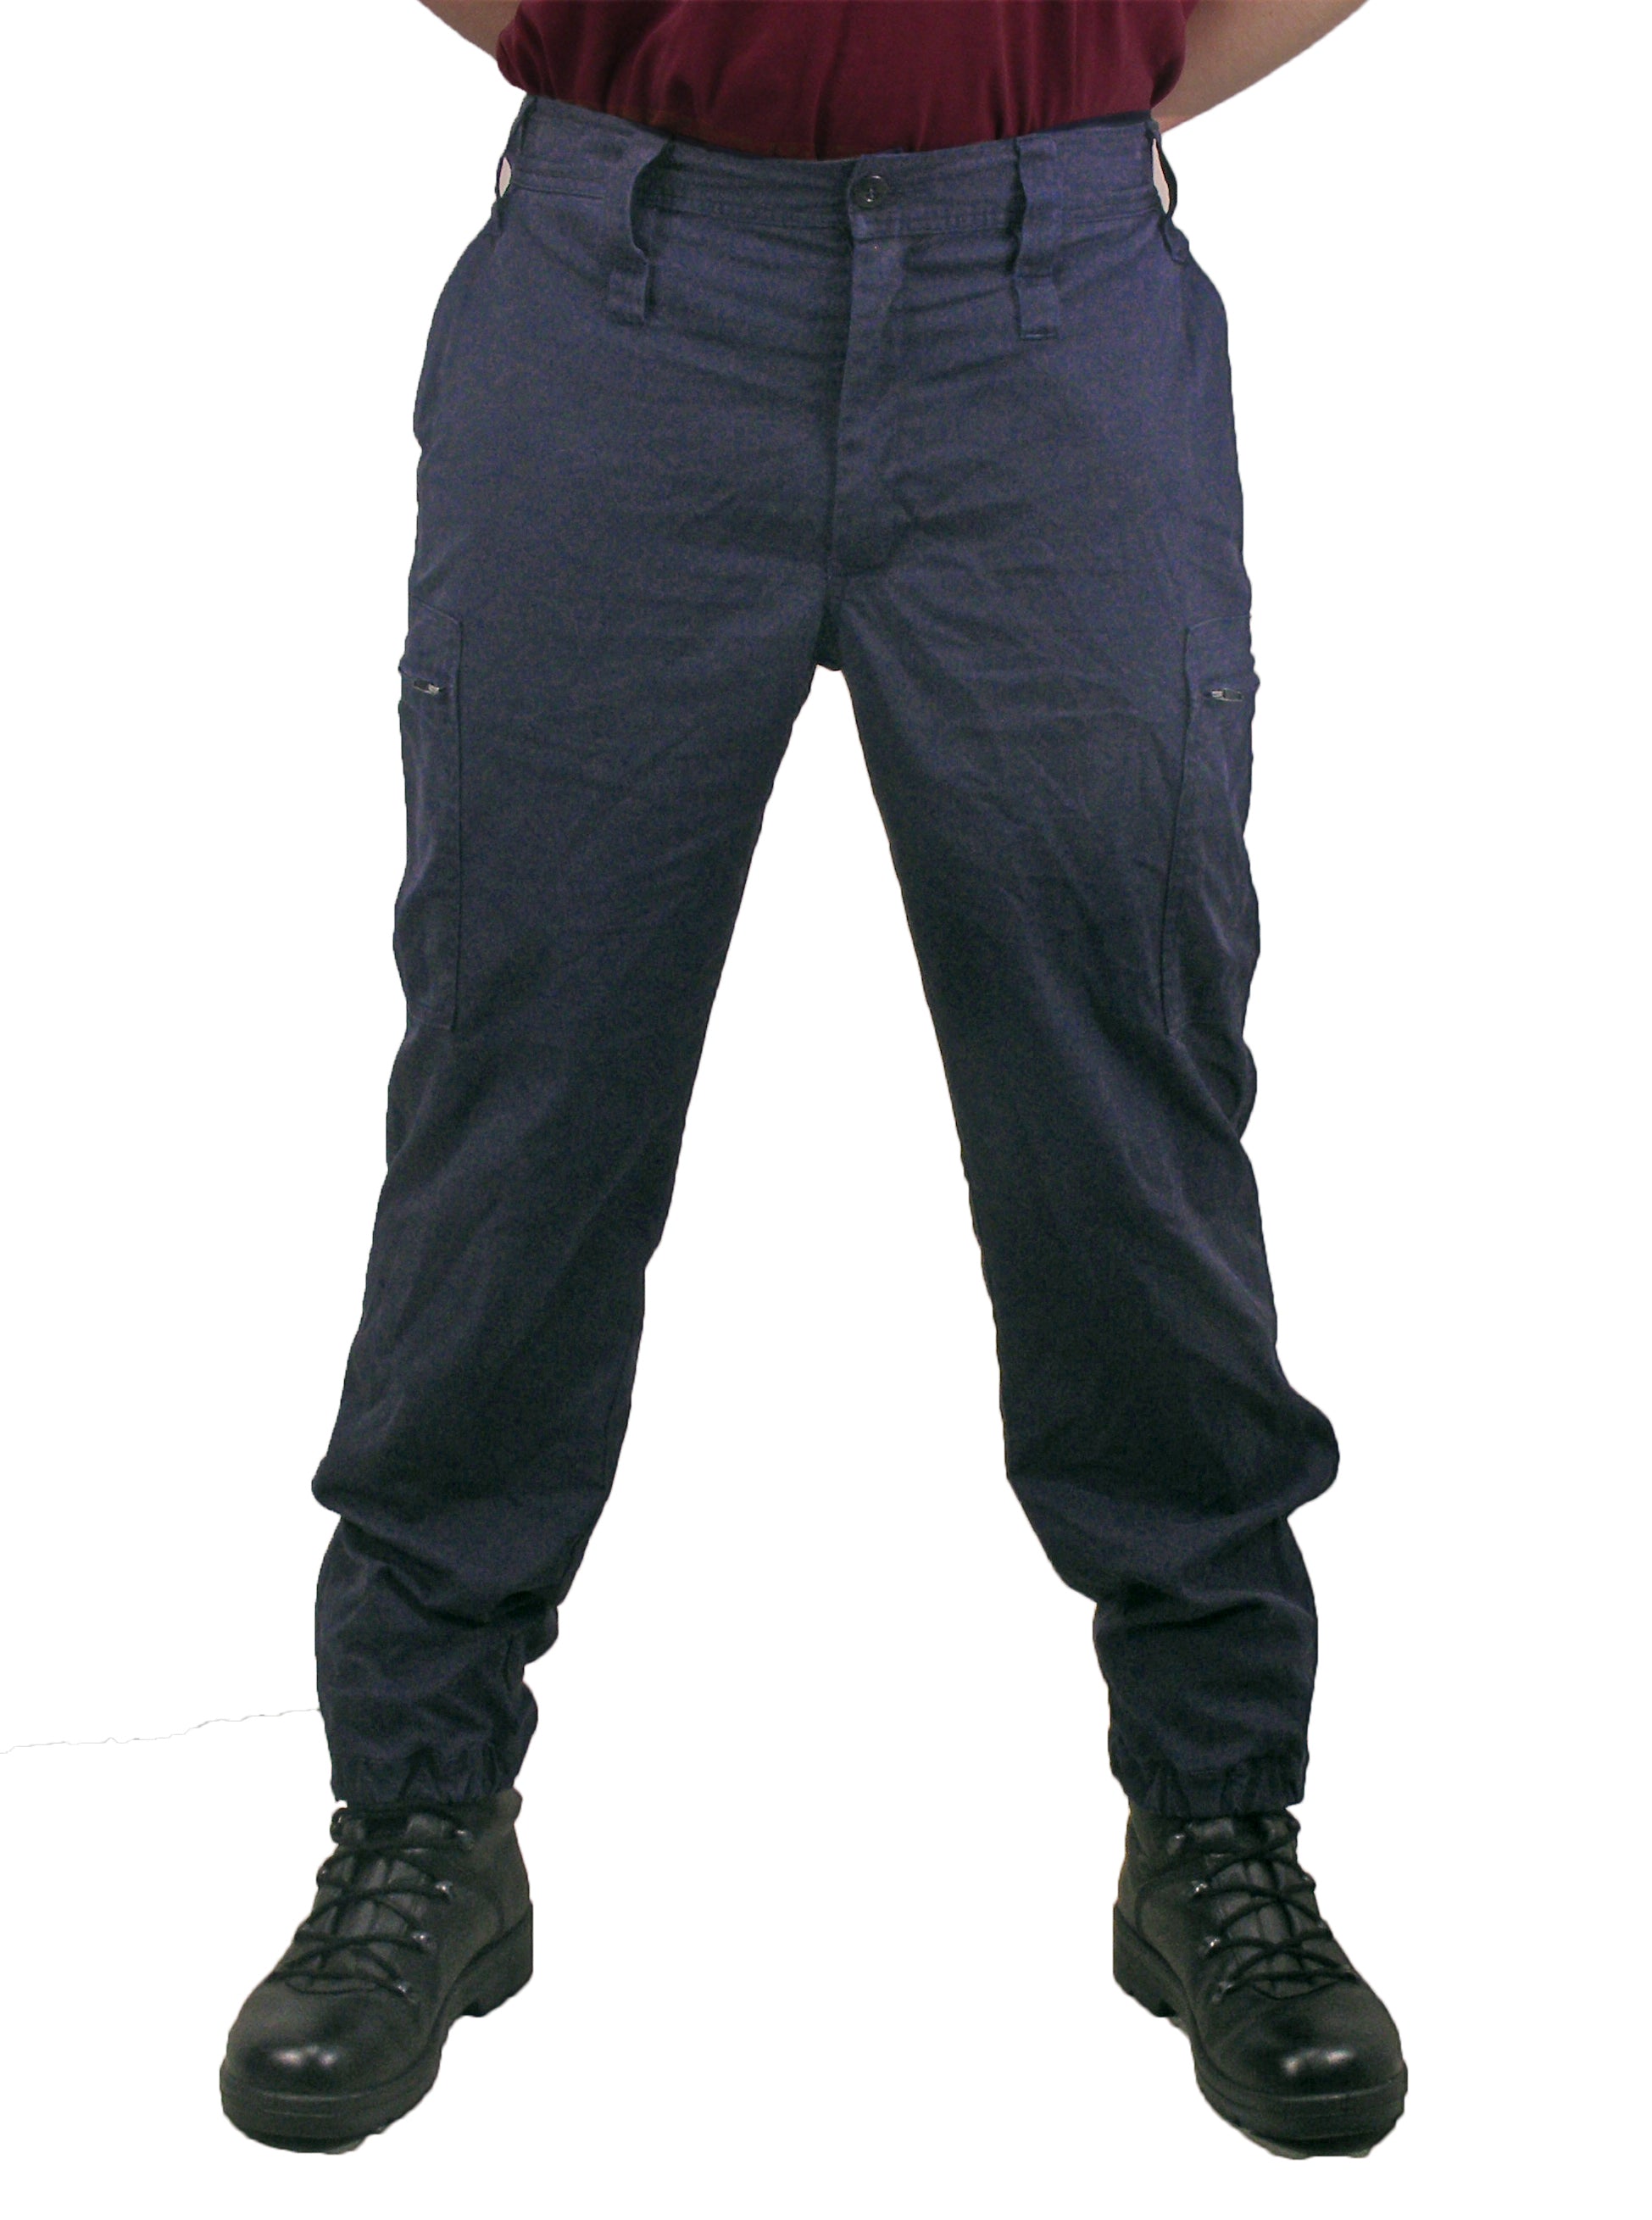 Update more than 194 mens navy combat trousers super hot